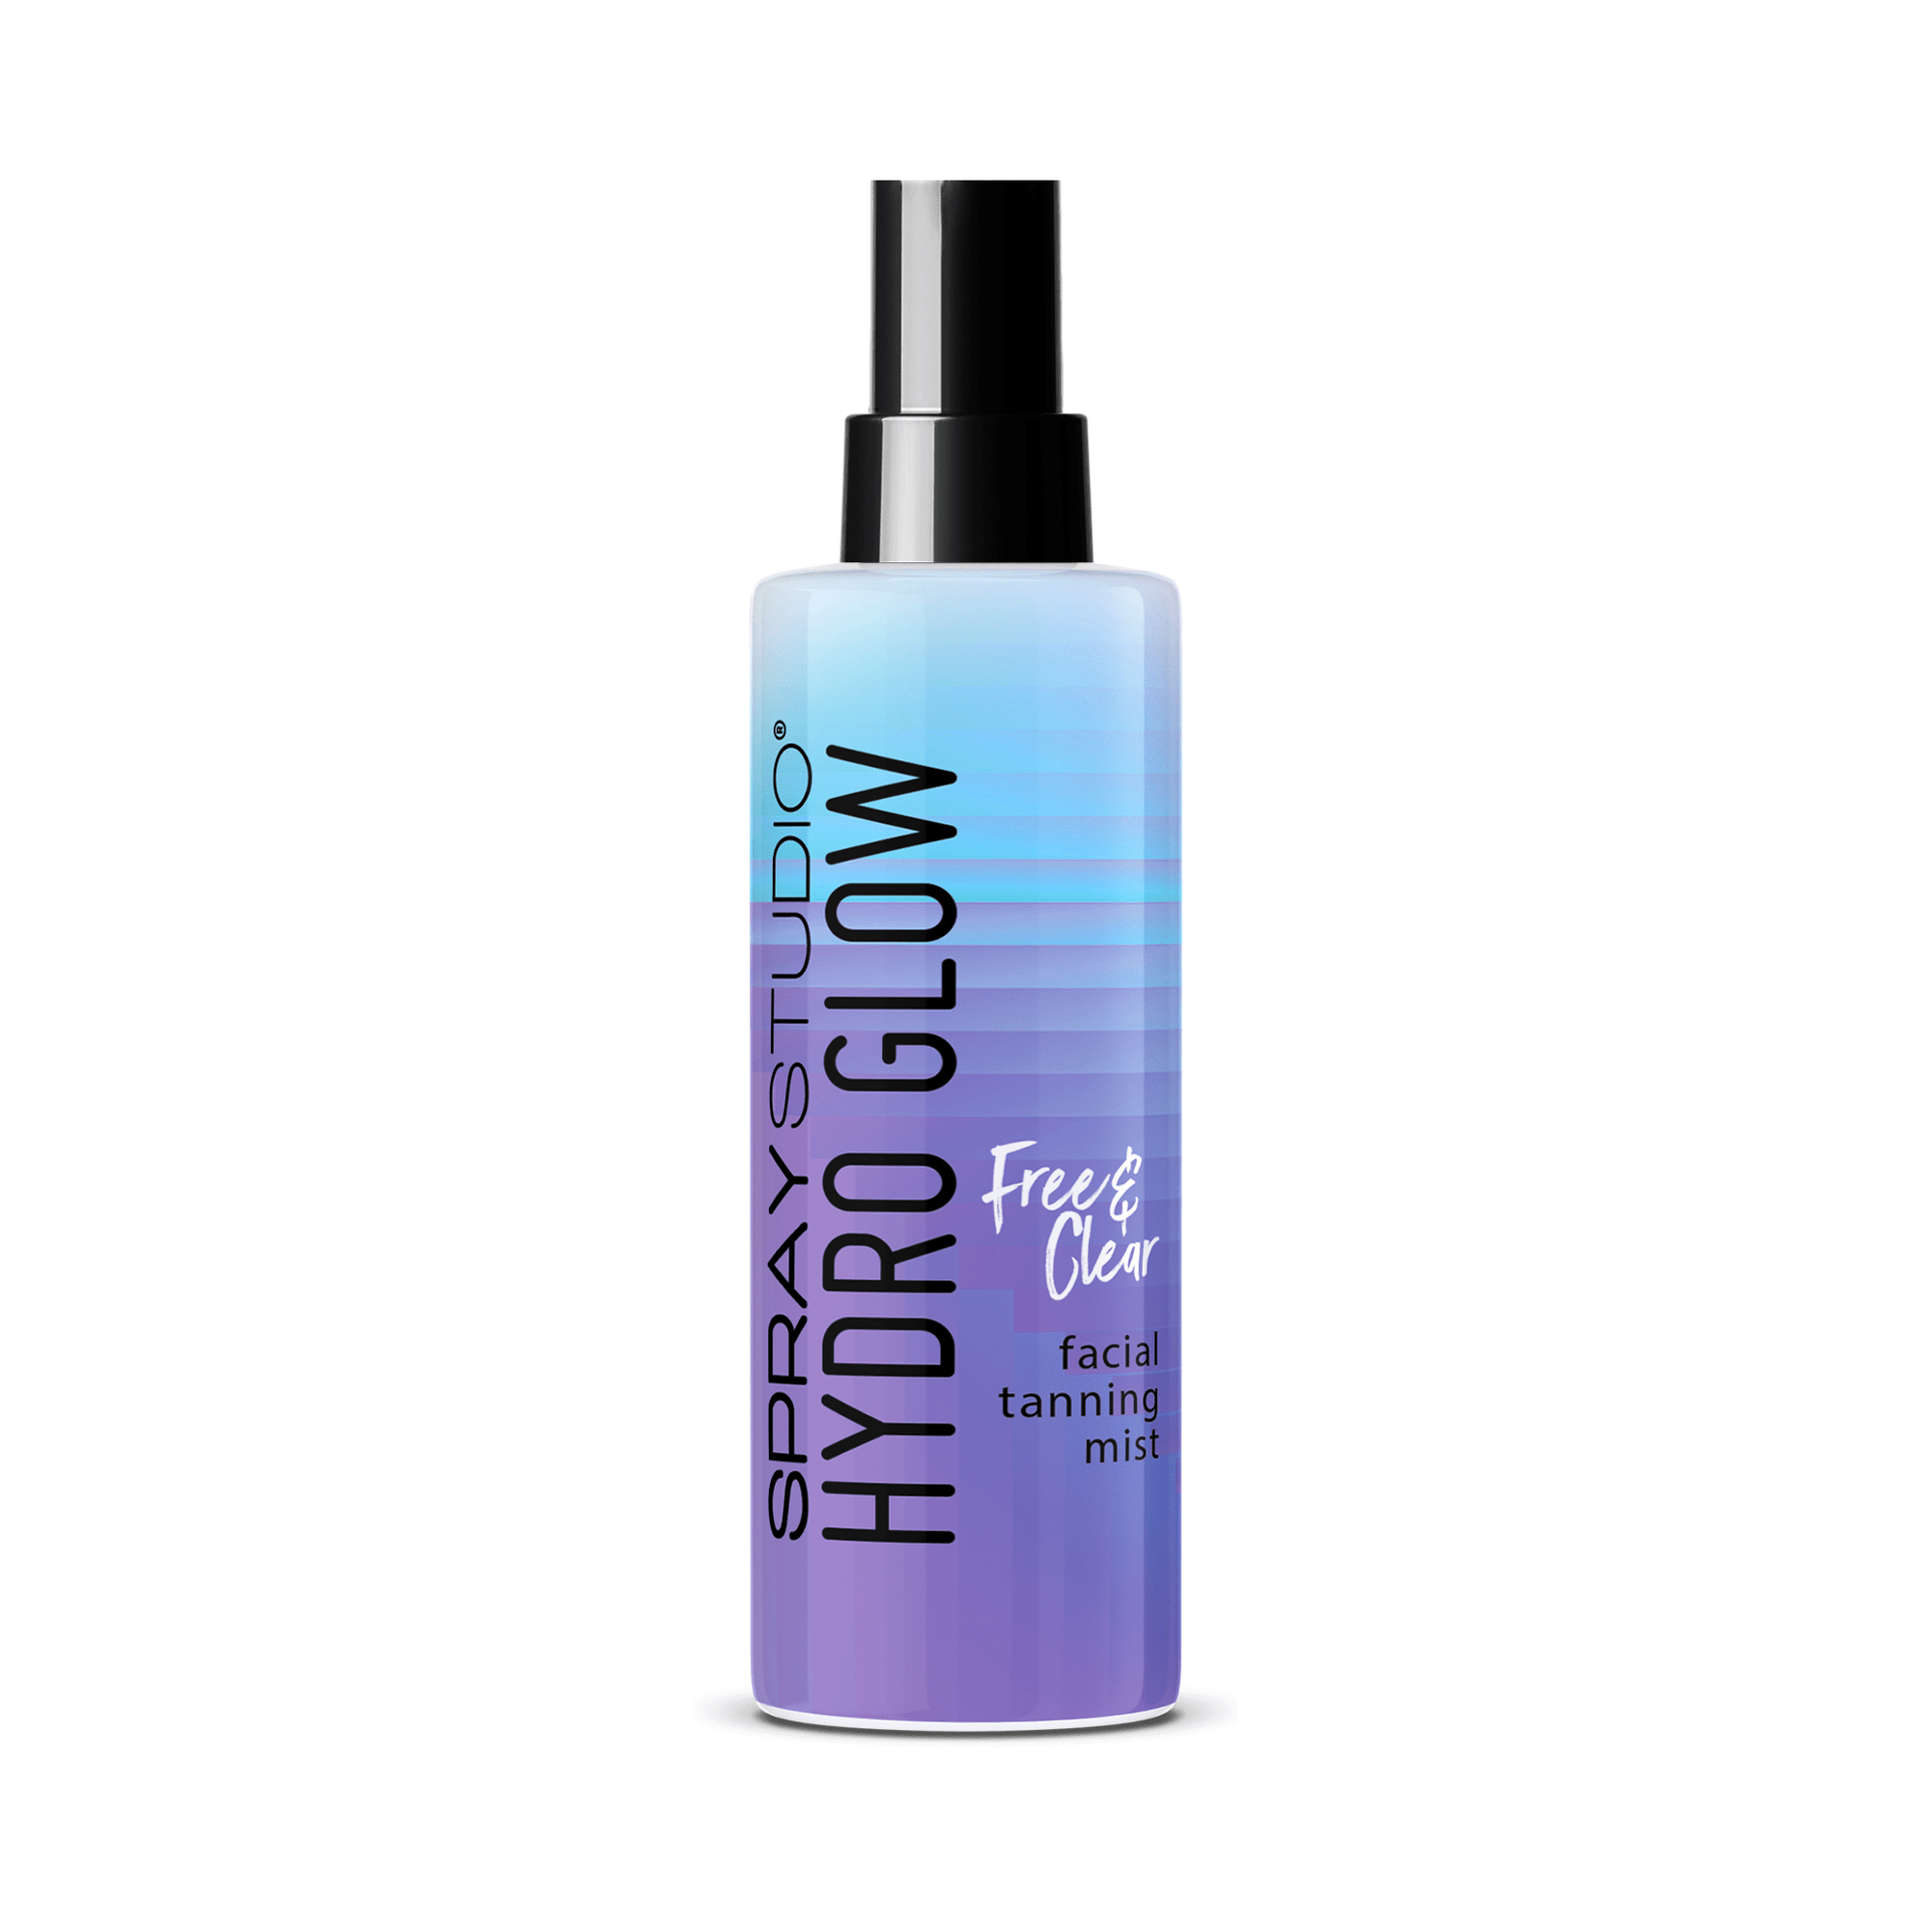 Hydro Glow Facial Tanning Mist "FREE and CLEAR"